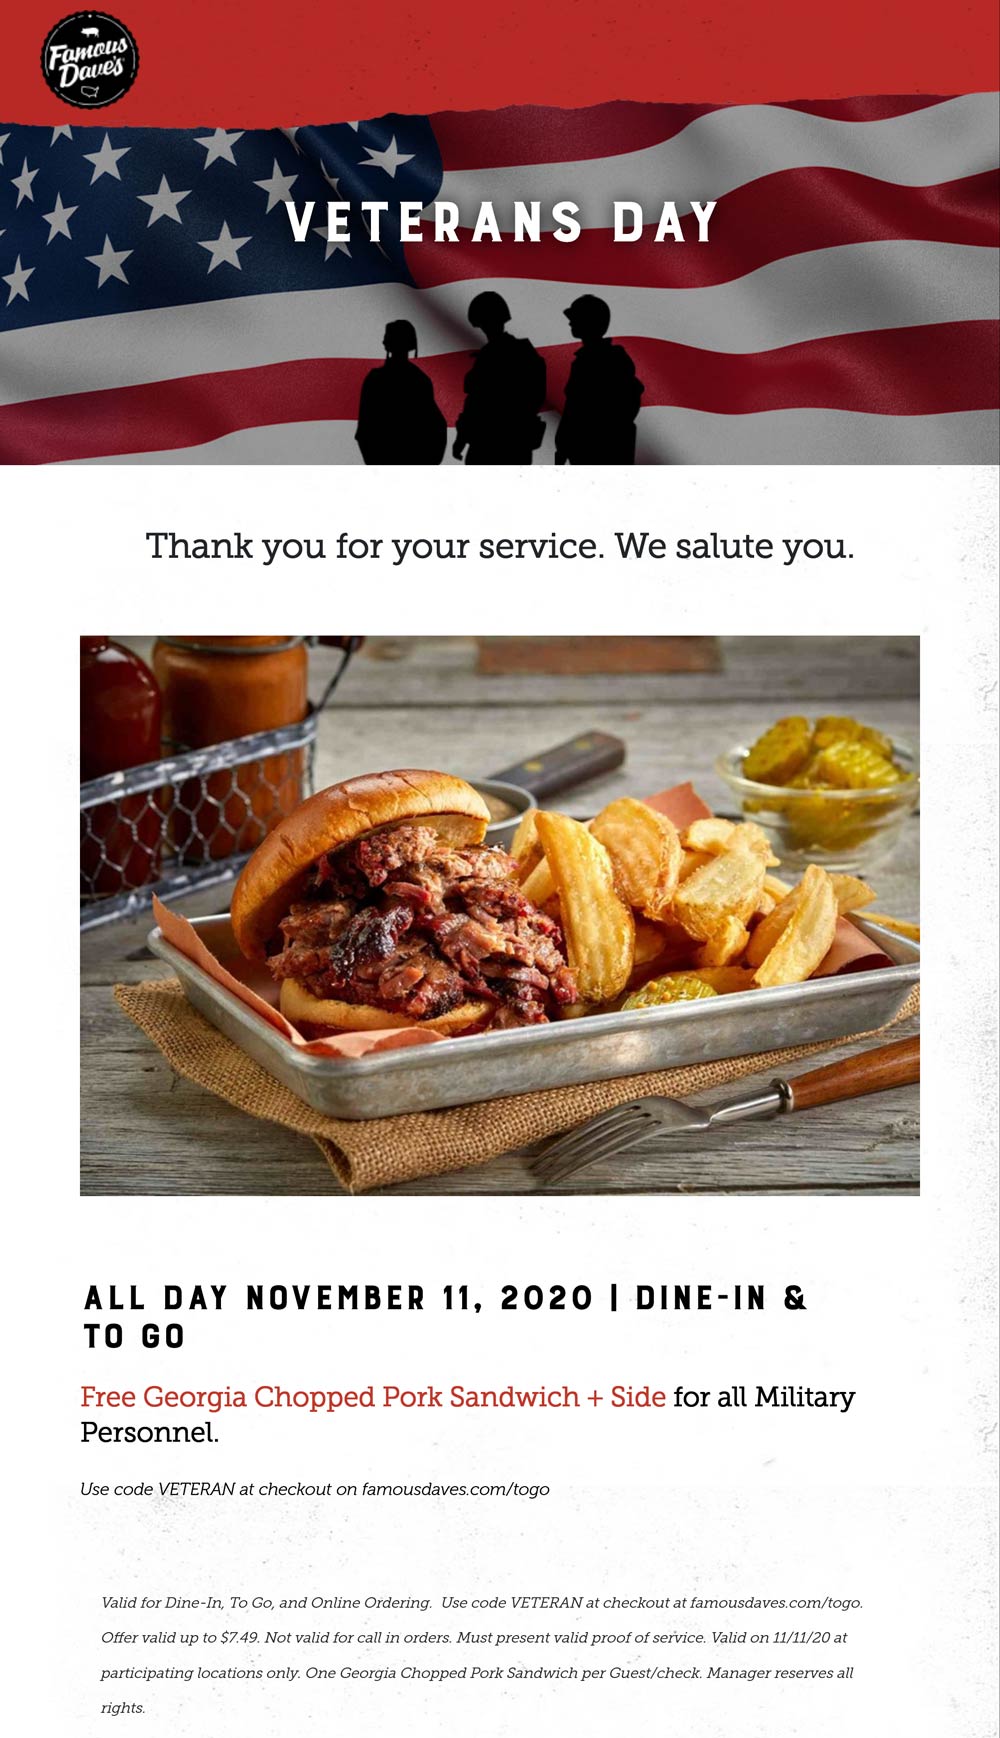 Famous Daves restaurants Coupon  Free pork sandwich & side for all military Wednesday at Famous Daves restaurants, or online via promo code VETERAN #famousdaves 